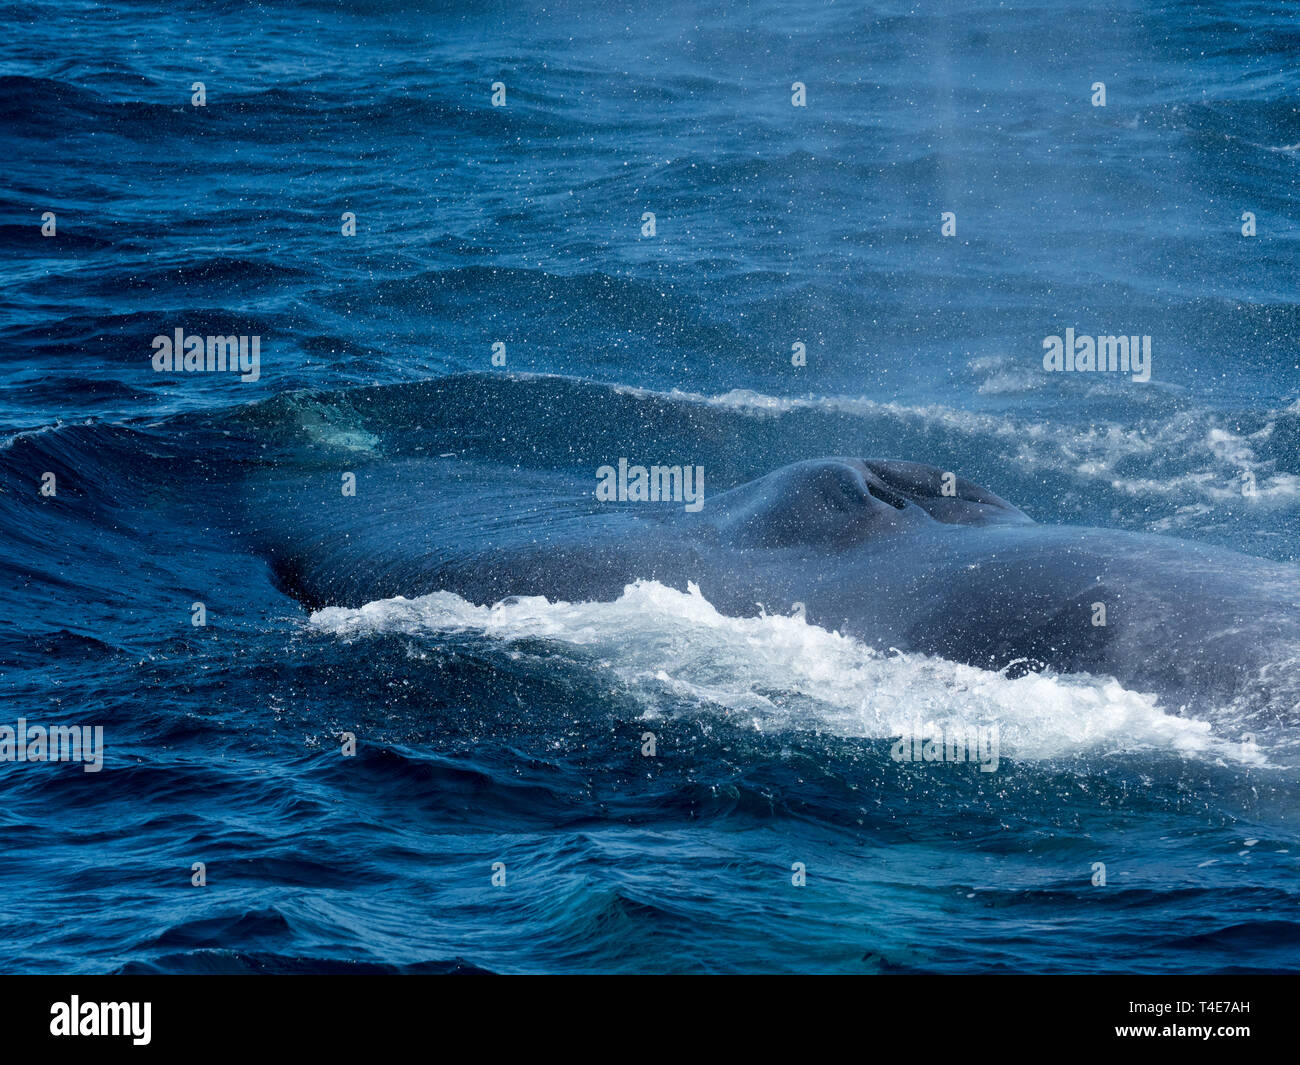 A blue whale, Balaenoptera musculus, surfacing with a Pacific white-sided dolphin bowriding it for fun in Baja, Mexico Stock Photo